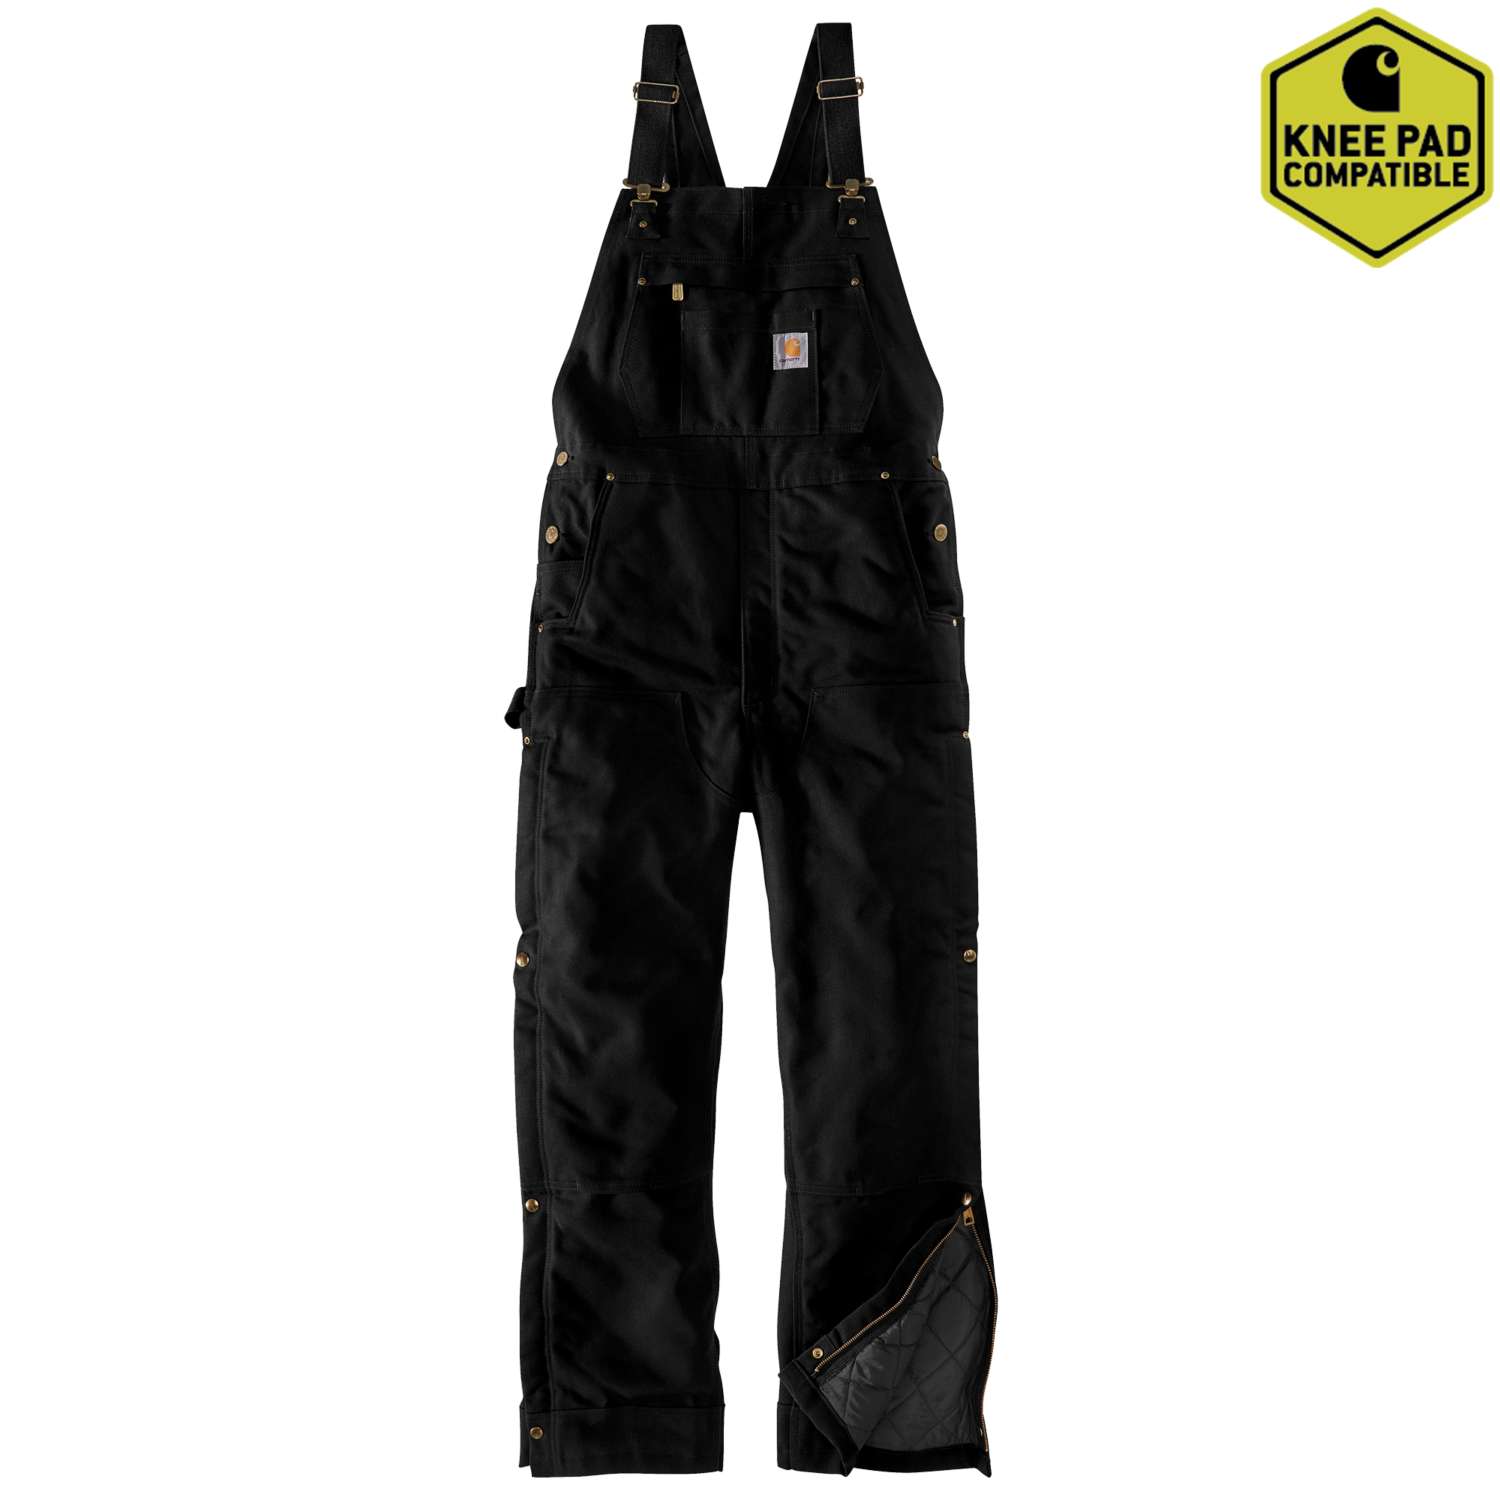 FIRM_DUCK_INSULATED_BIB_OVERALL_6Z3wGYMTsc